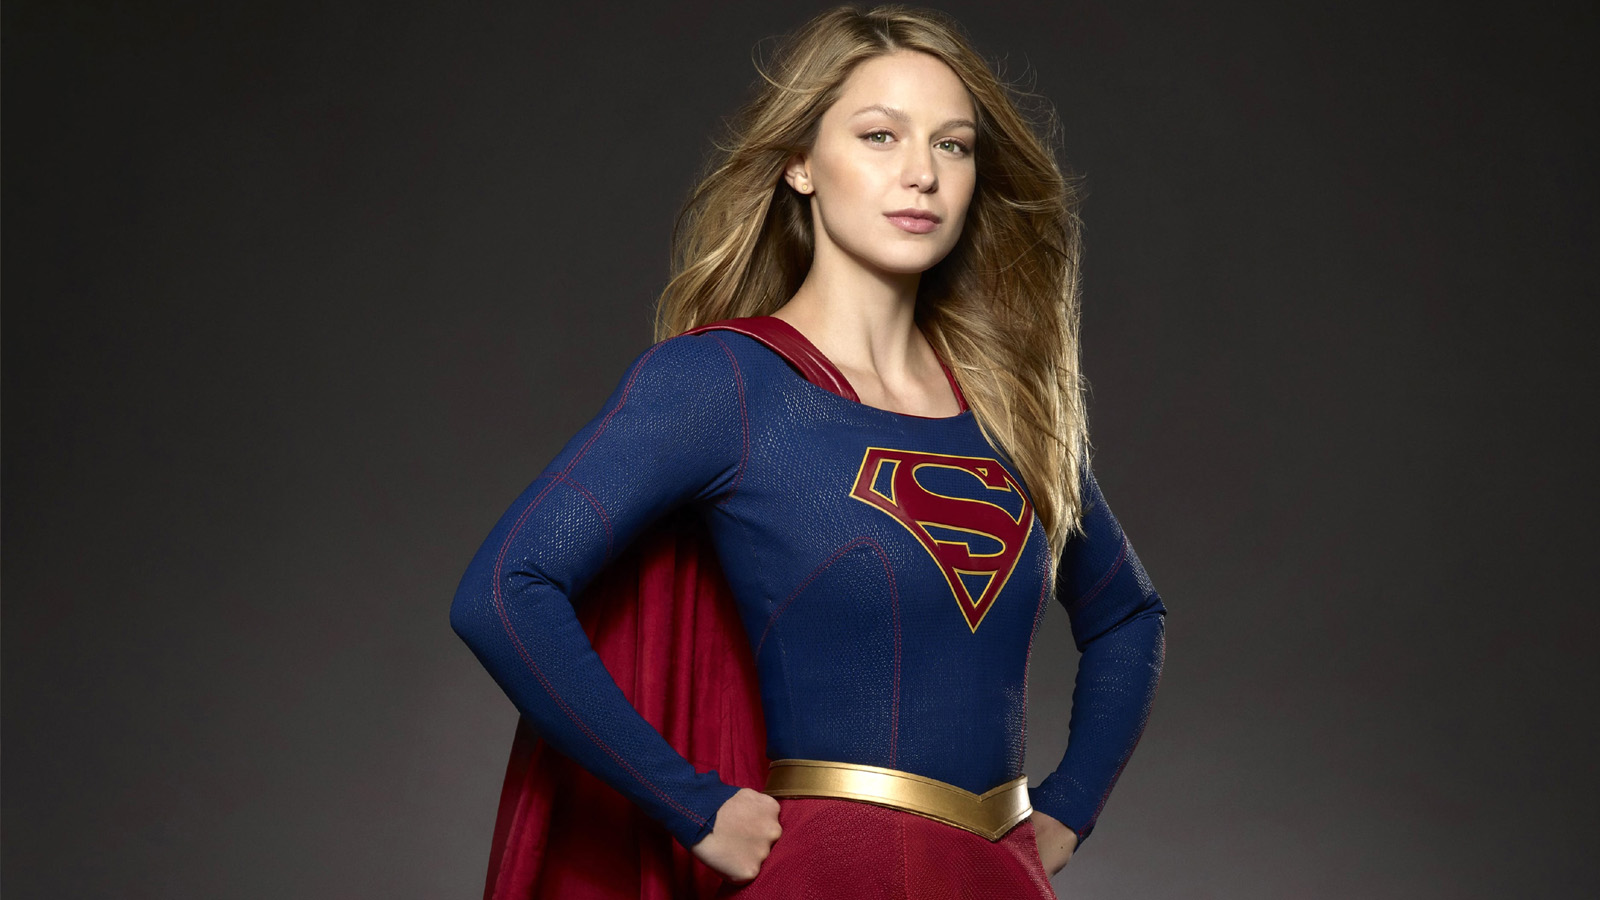 Supergirl: The House of L